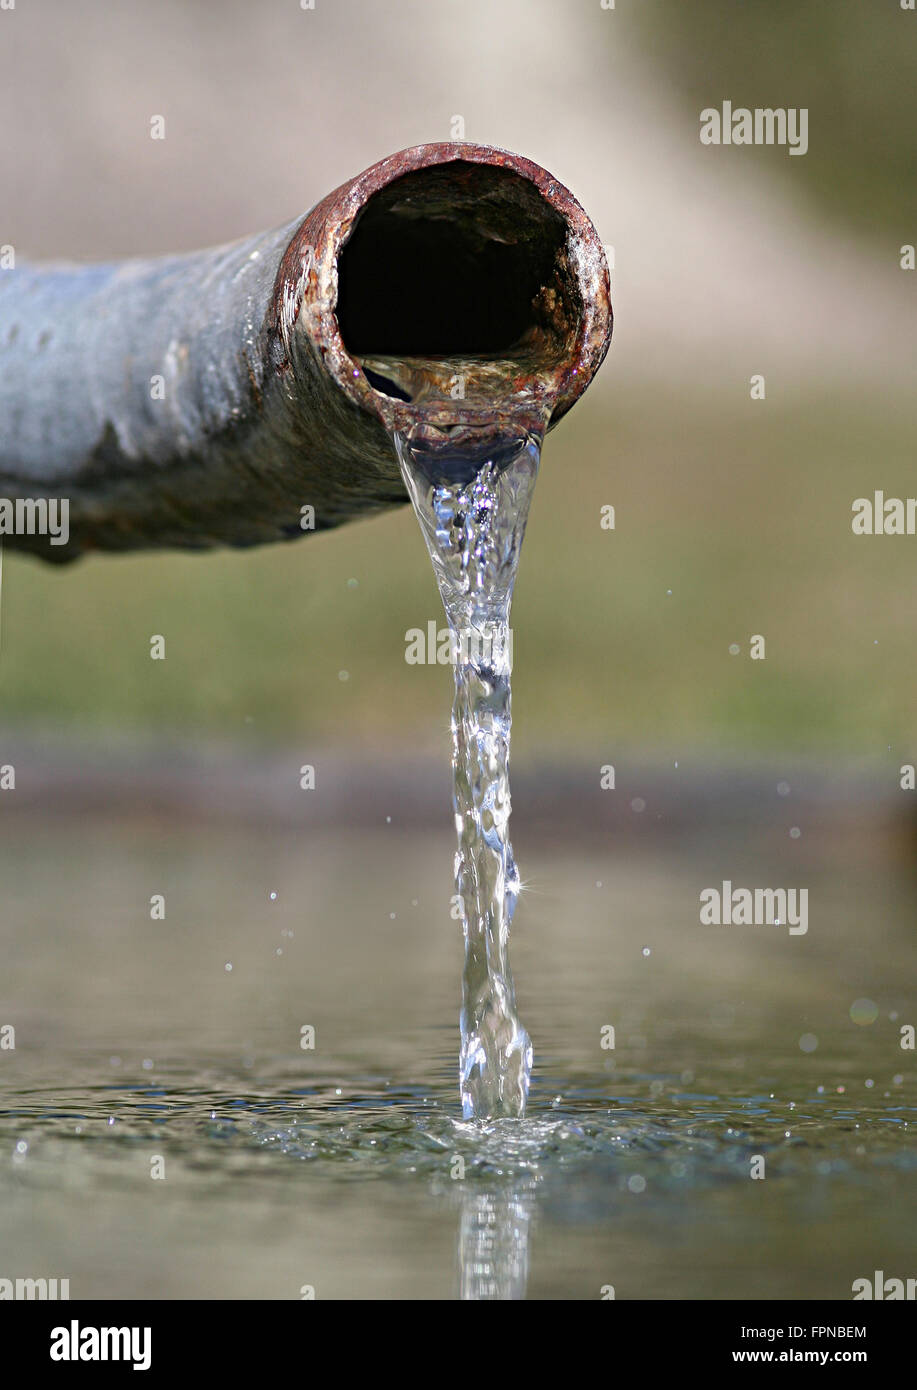 Crystal clear water emerging from rusty old pipe. Symbol for clear water and developing nation, water distribution etc.. Stock Photo